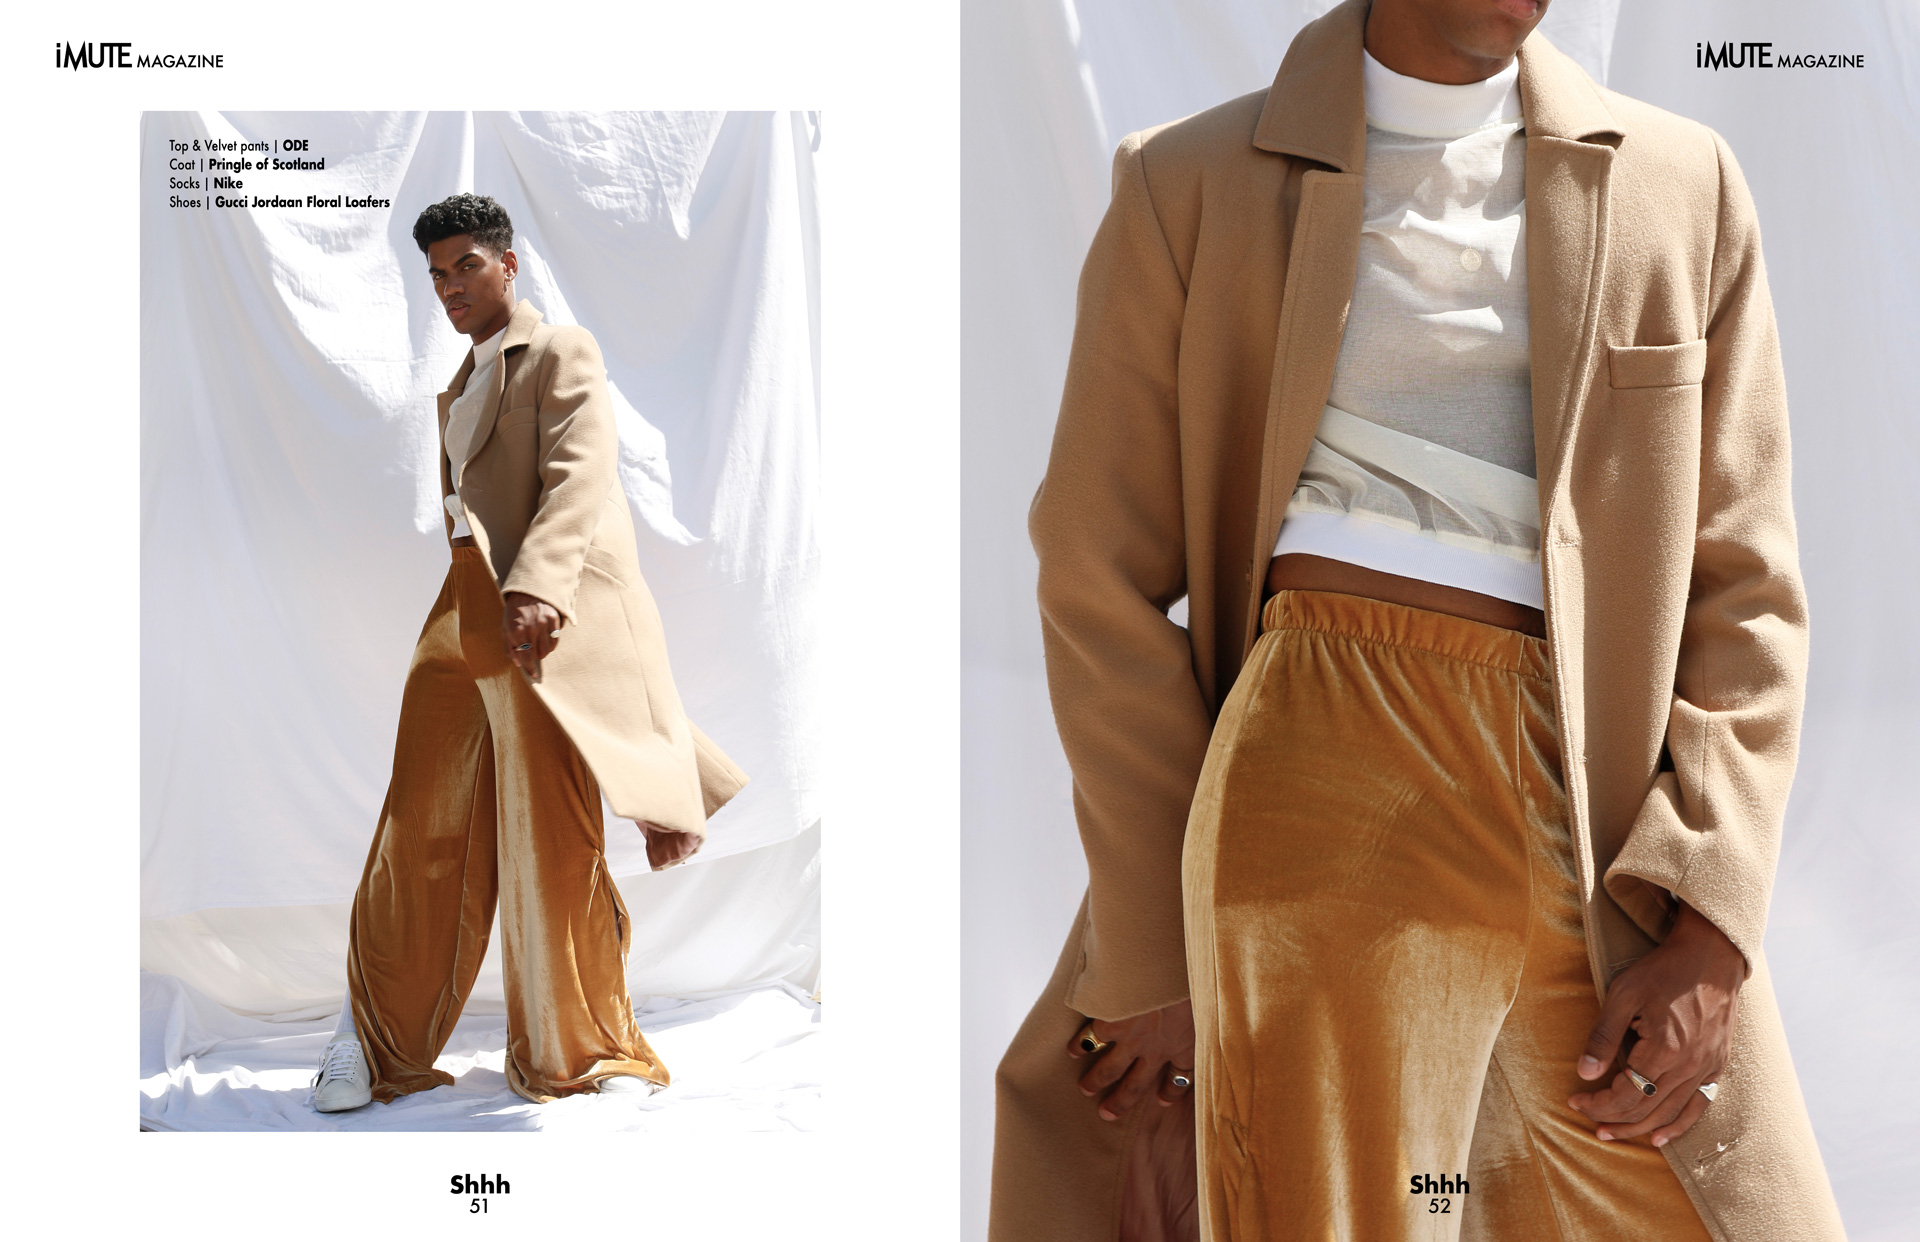 Coloured | Cover story iMute Magazine Fall Issue no 20 Photographer | Gemma Shepherd Model | Nicolas Van Graan @ 20 Management Stylists | Imran Mohamed & Rebecca Odendaal